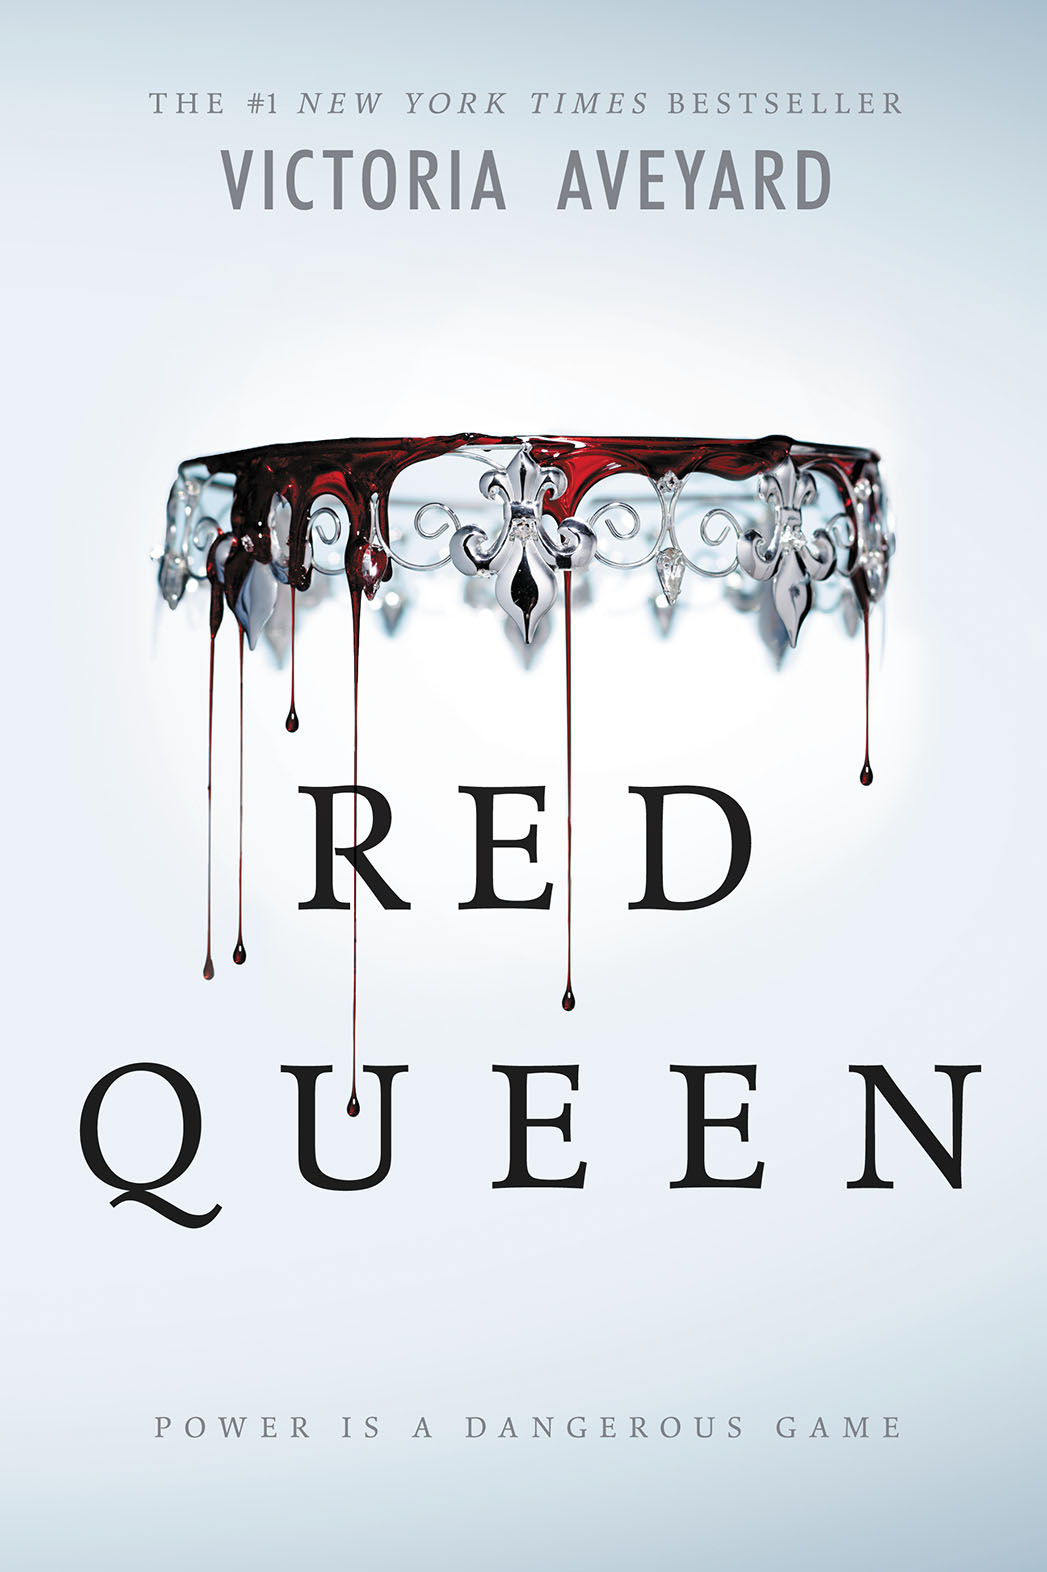 “Red Queen” series has fans eagerly anticipating the next one